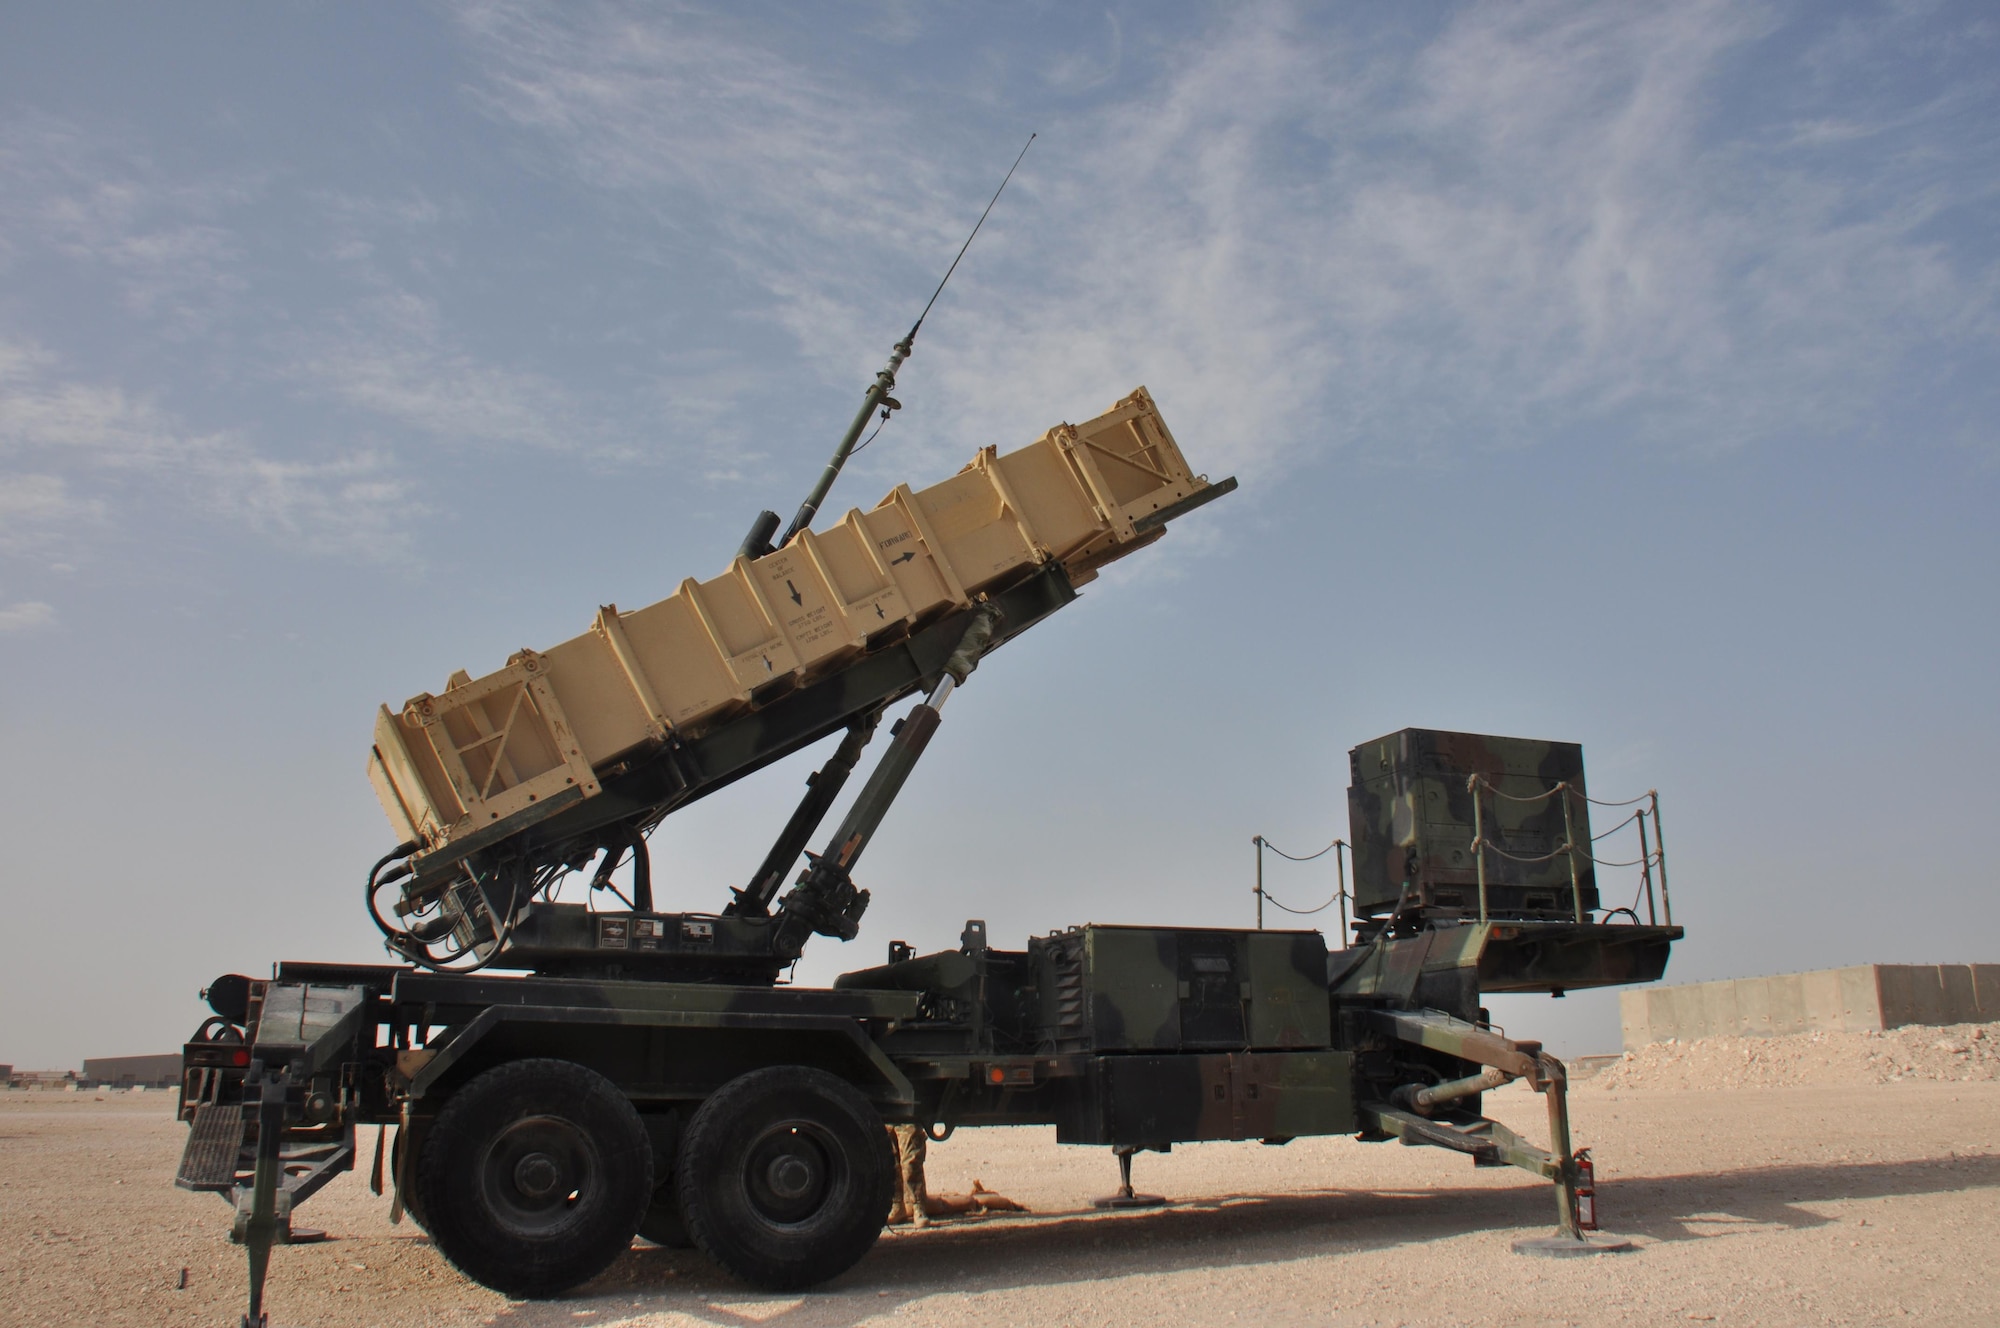 A Patriot PAC-2 missile battery prepares to move into the firing position during an exercise at Al Udeid Air Base, Qatar Mar. 4. The Patriot missiles at AUAB protect the base from a variety of airborne threats including tactical ballistic missiles and drones.  (U.S. Air Force photo by Tech. Sgt. James Hodgman/Released)